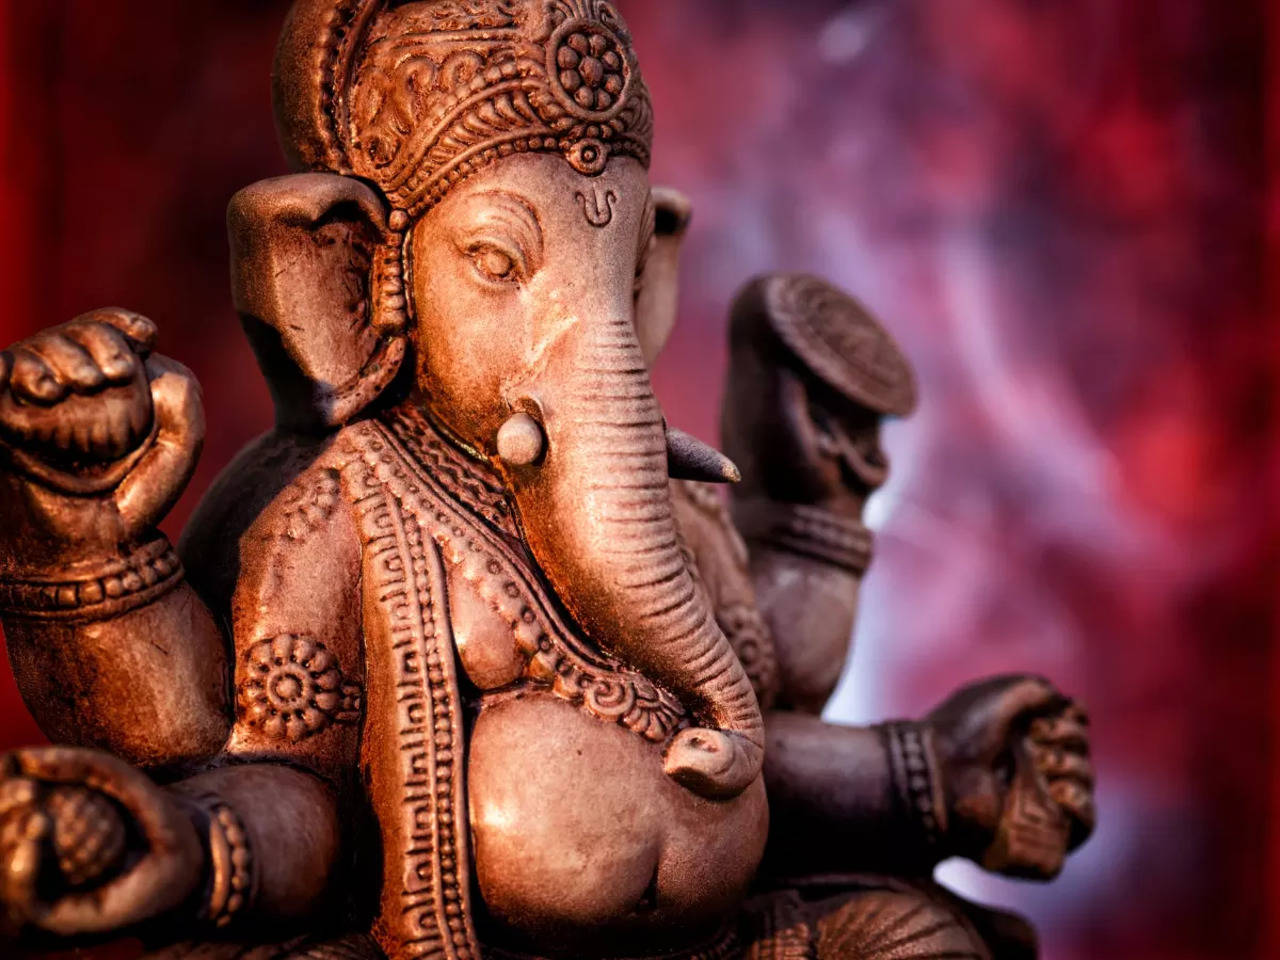 “An Incredible Assortment of Vinayaka Images in Full 4K Resolution: Over 999 Options to Choose From”